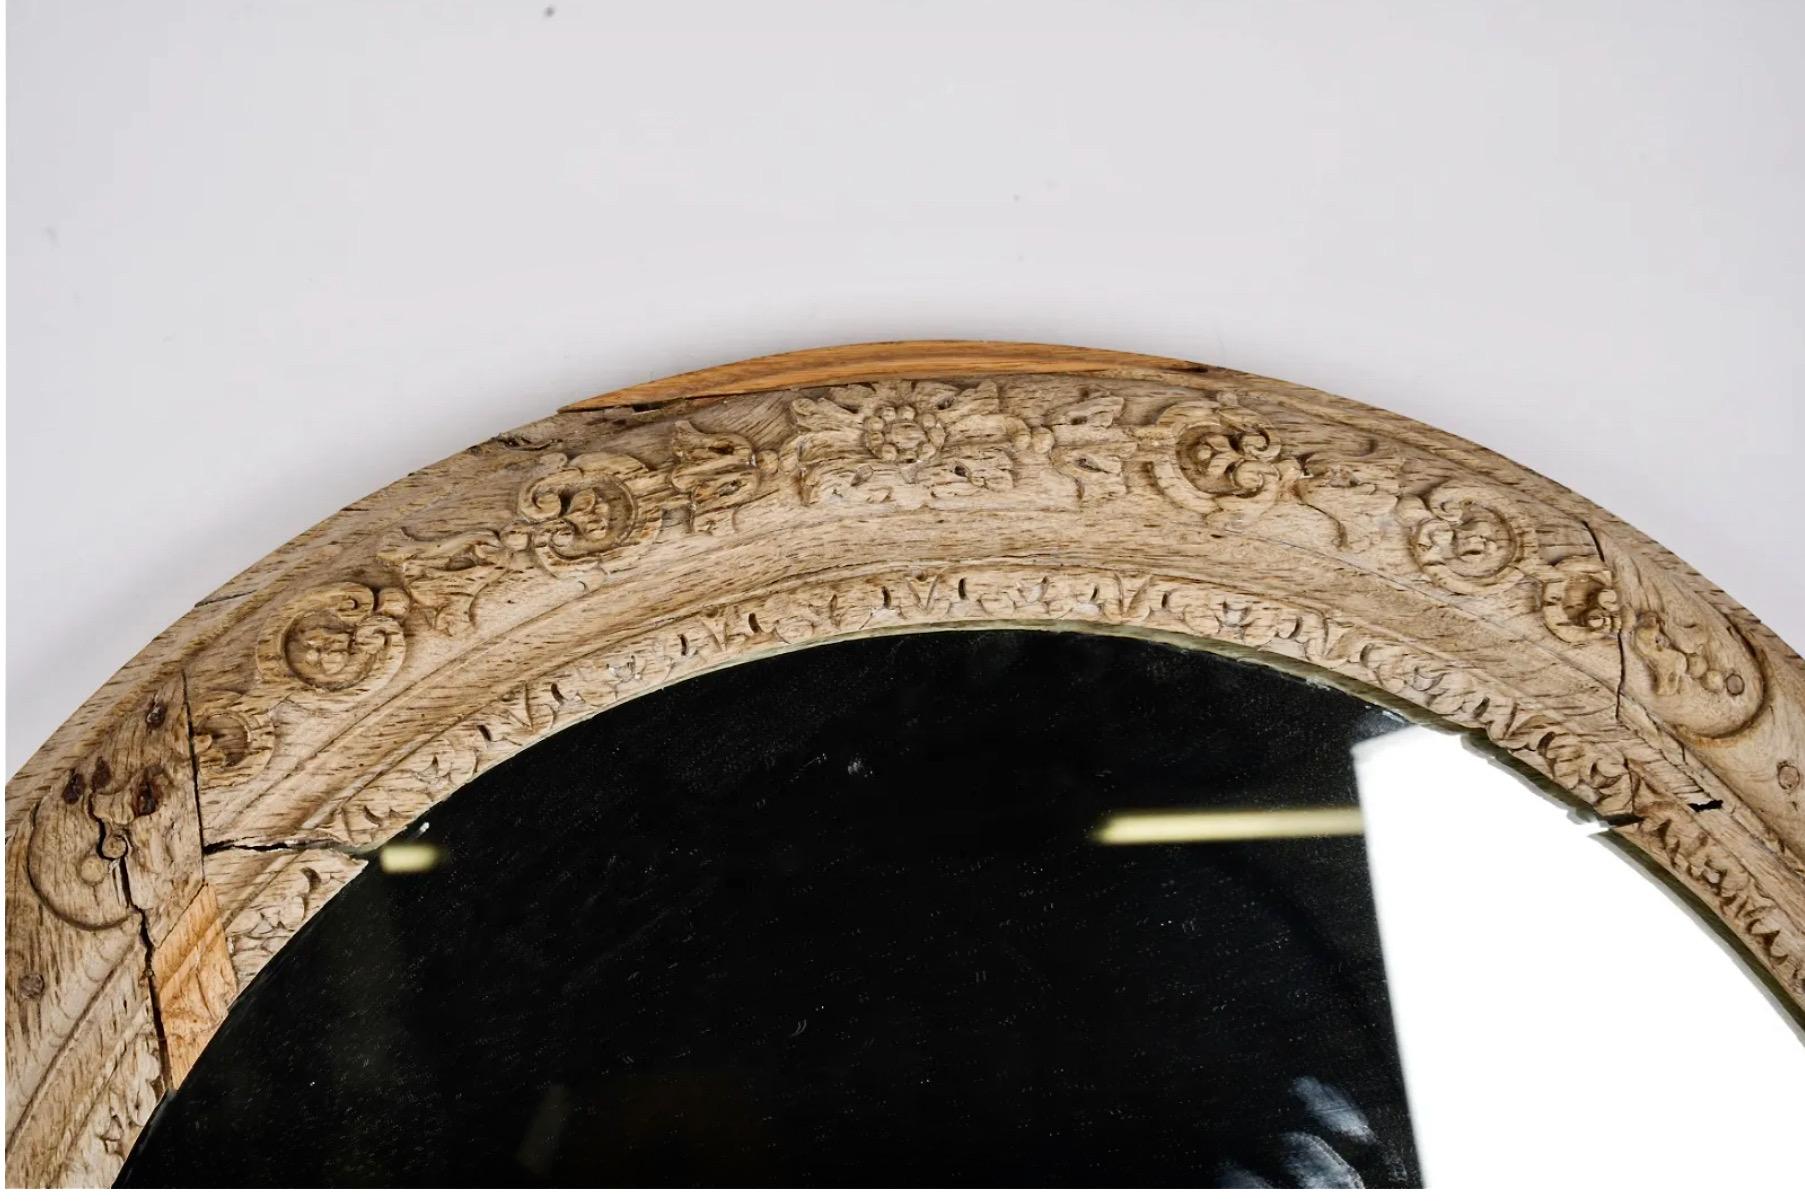 This is a wonderfully naturally patinated hand carved oval frame that most probably originally held a portrait. The frame was created in the late 17th or early 18th century and originally was gold leafed. Over its 300 years of life it has been